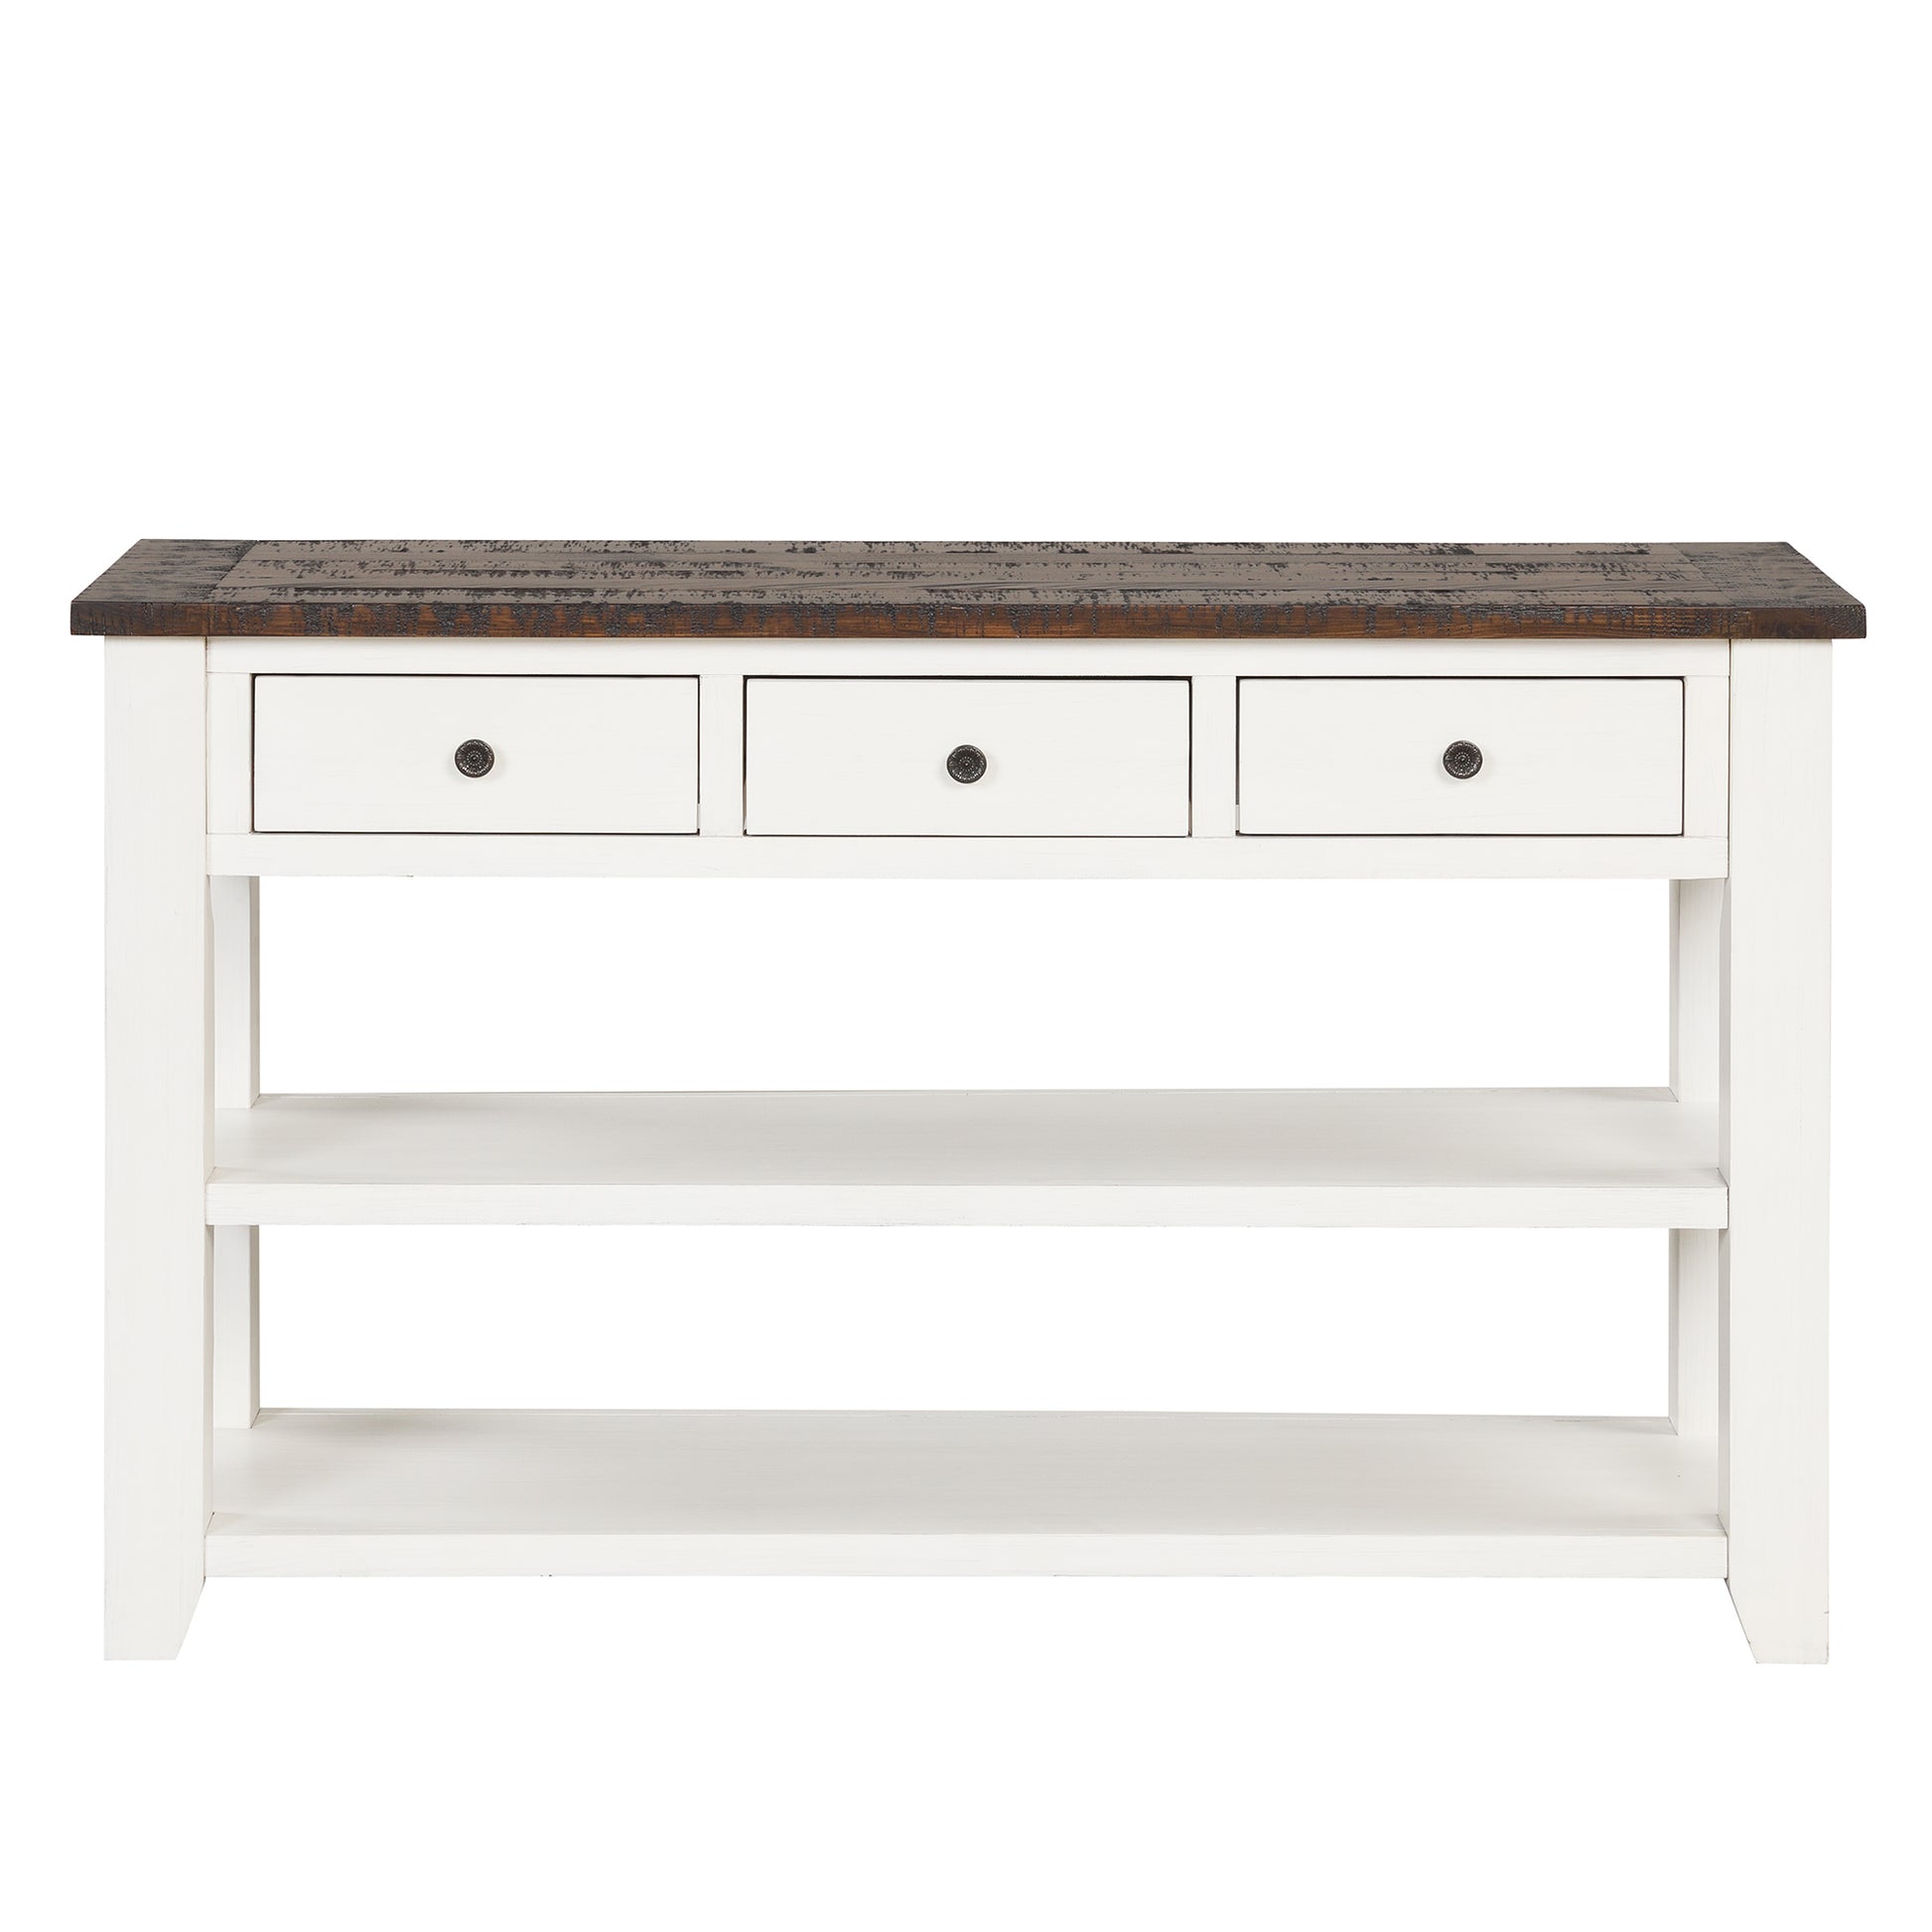 48'' Solid Pine Wood Top Console Table, Modern antique white-pine